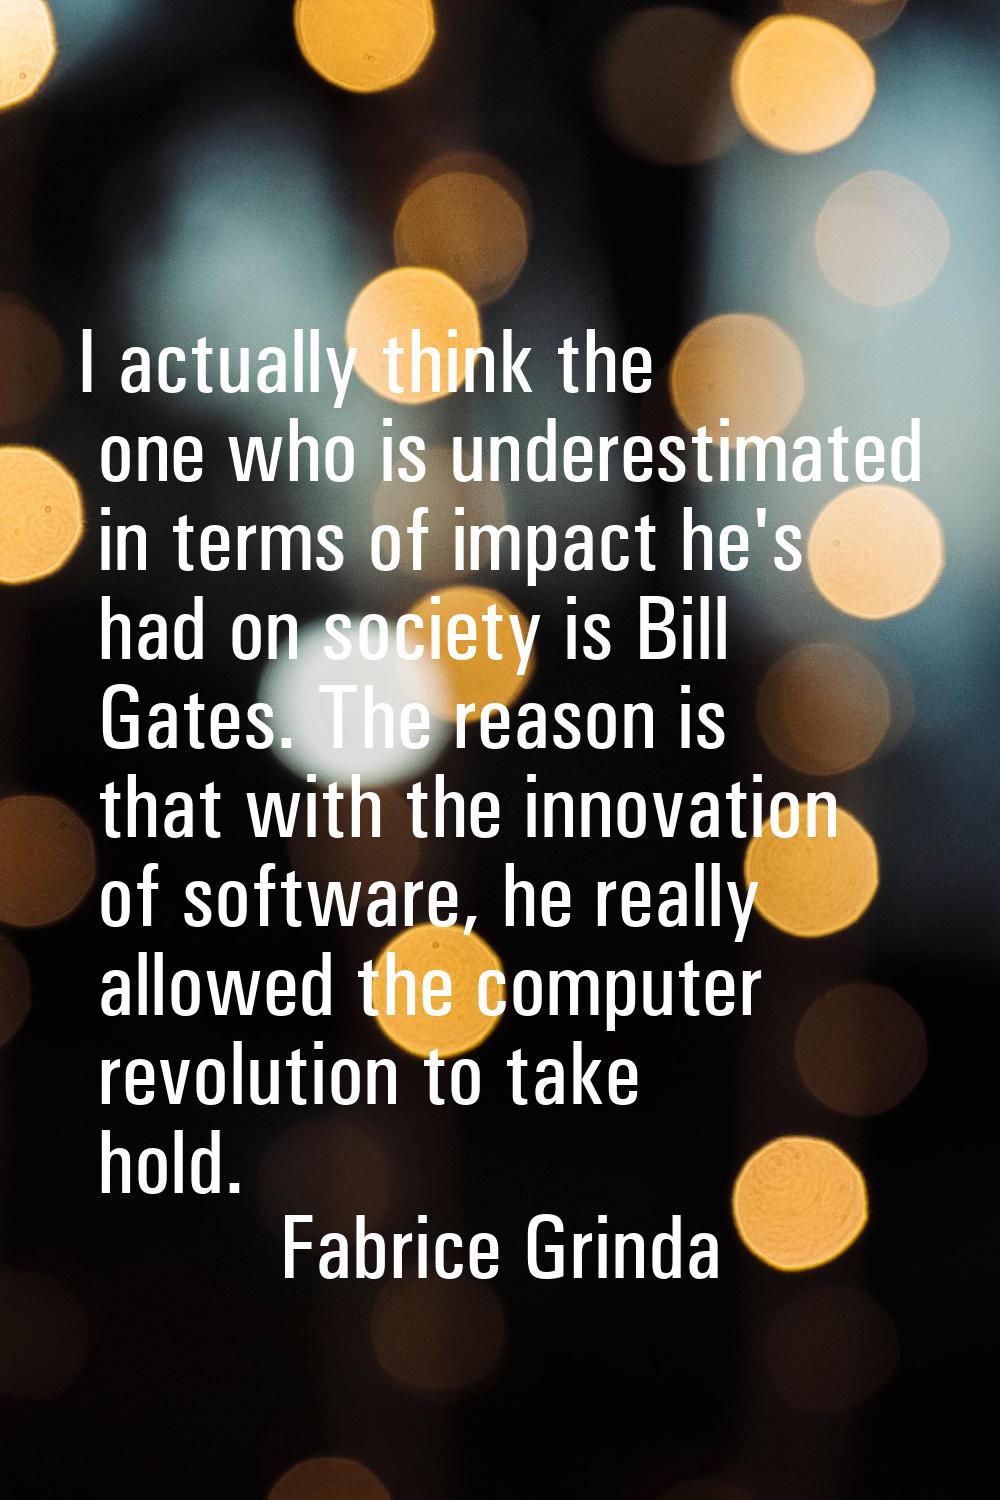 I actually think the one who is underestimated in terms of impact he's had on society is Bill Gates